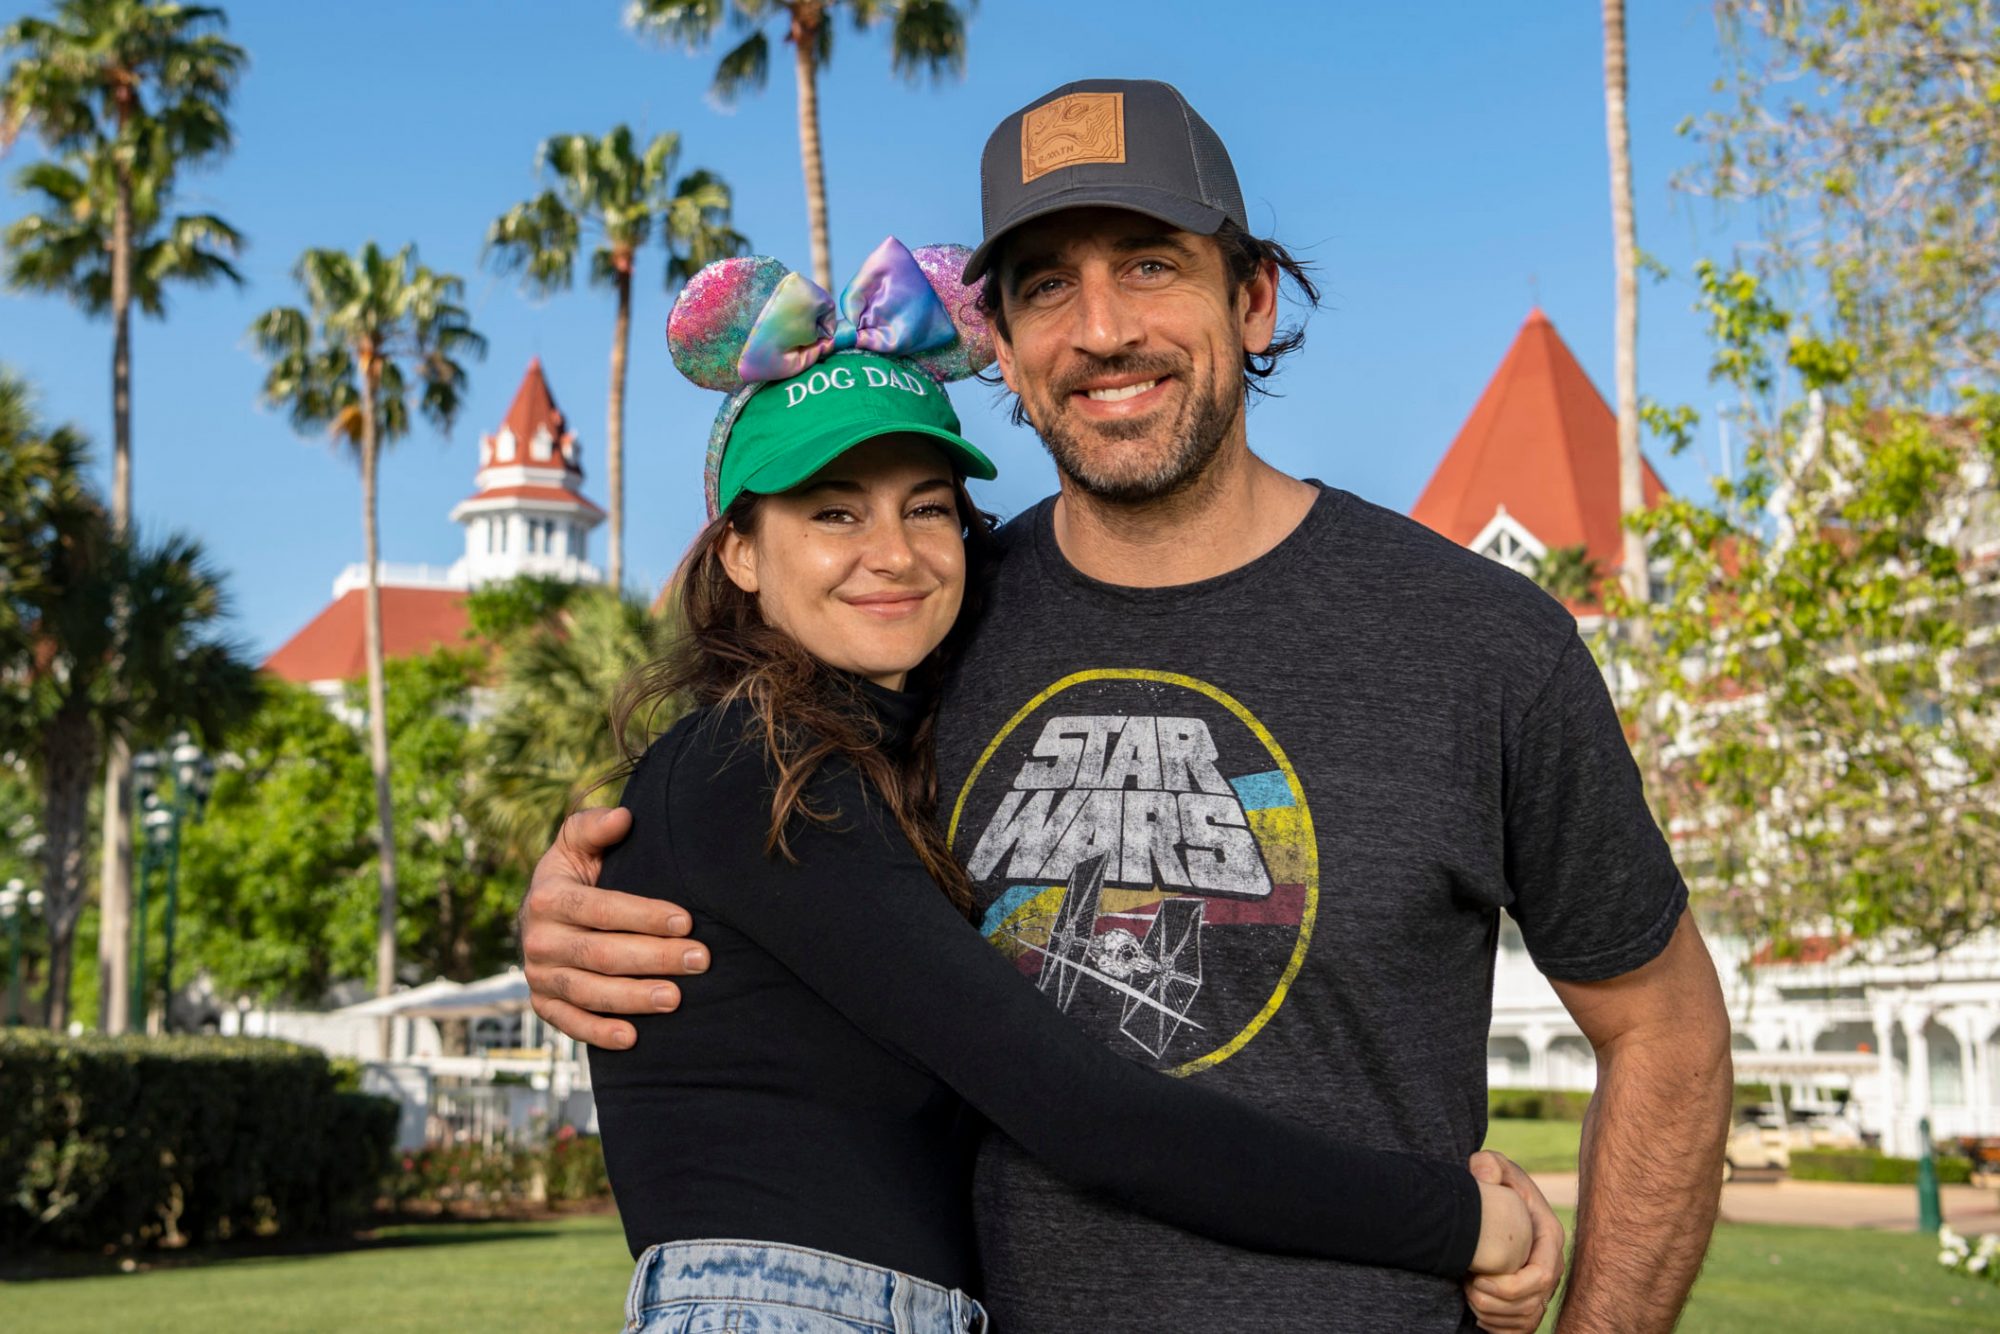 Who is Aaron Rodgers wife? Is Aaron Rodgers still dating Shailene Woodley?